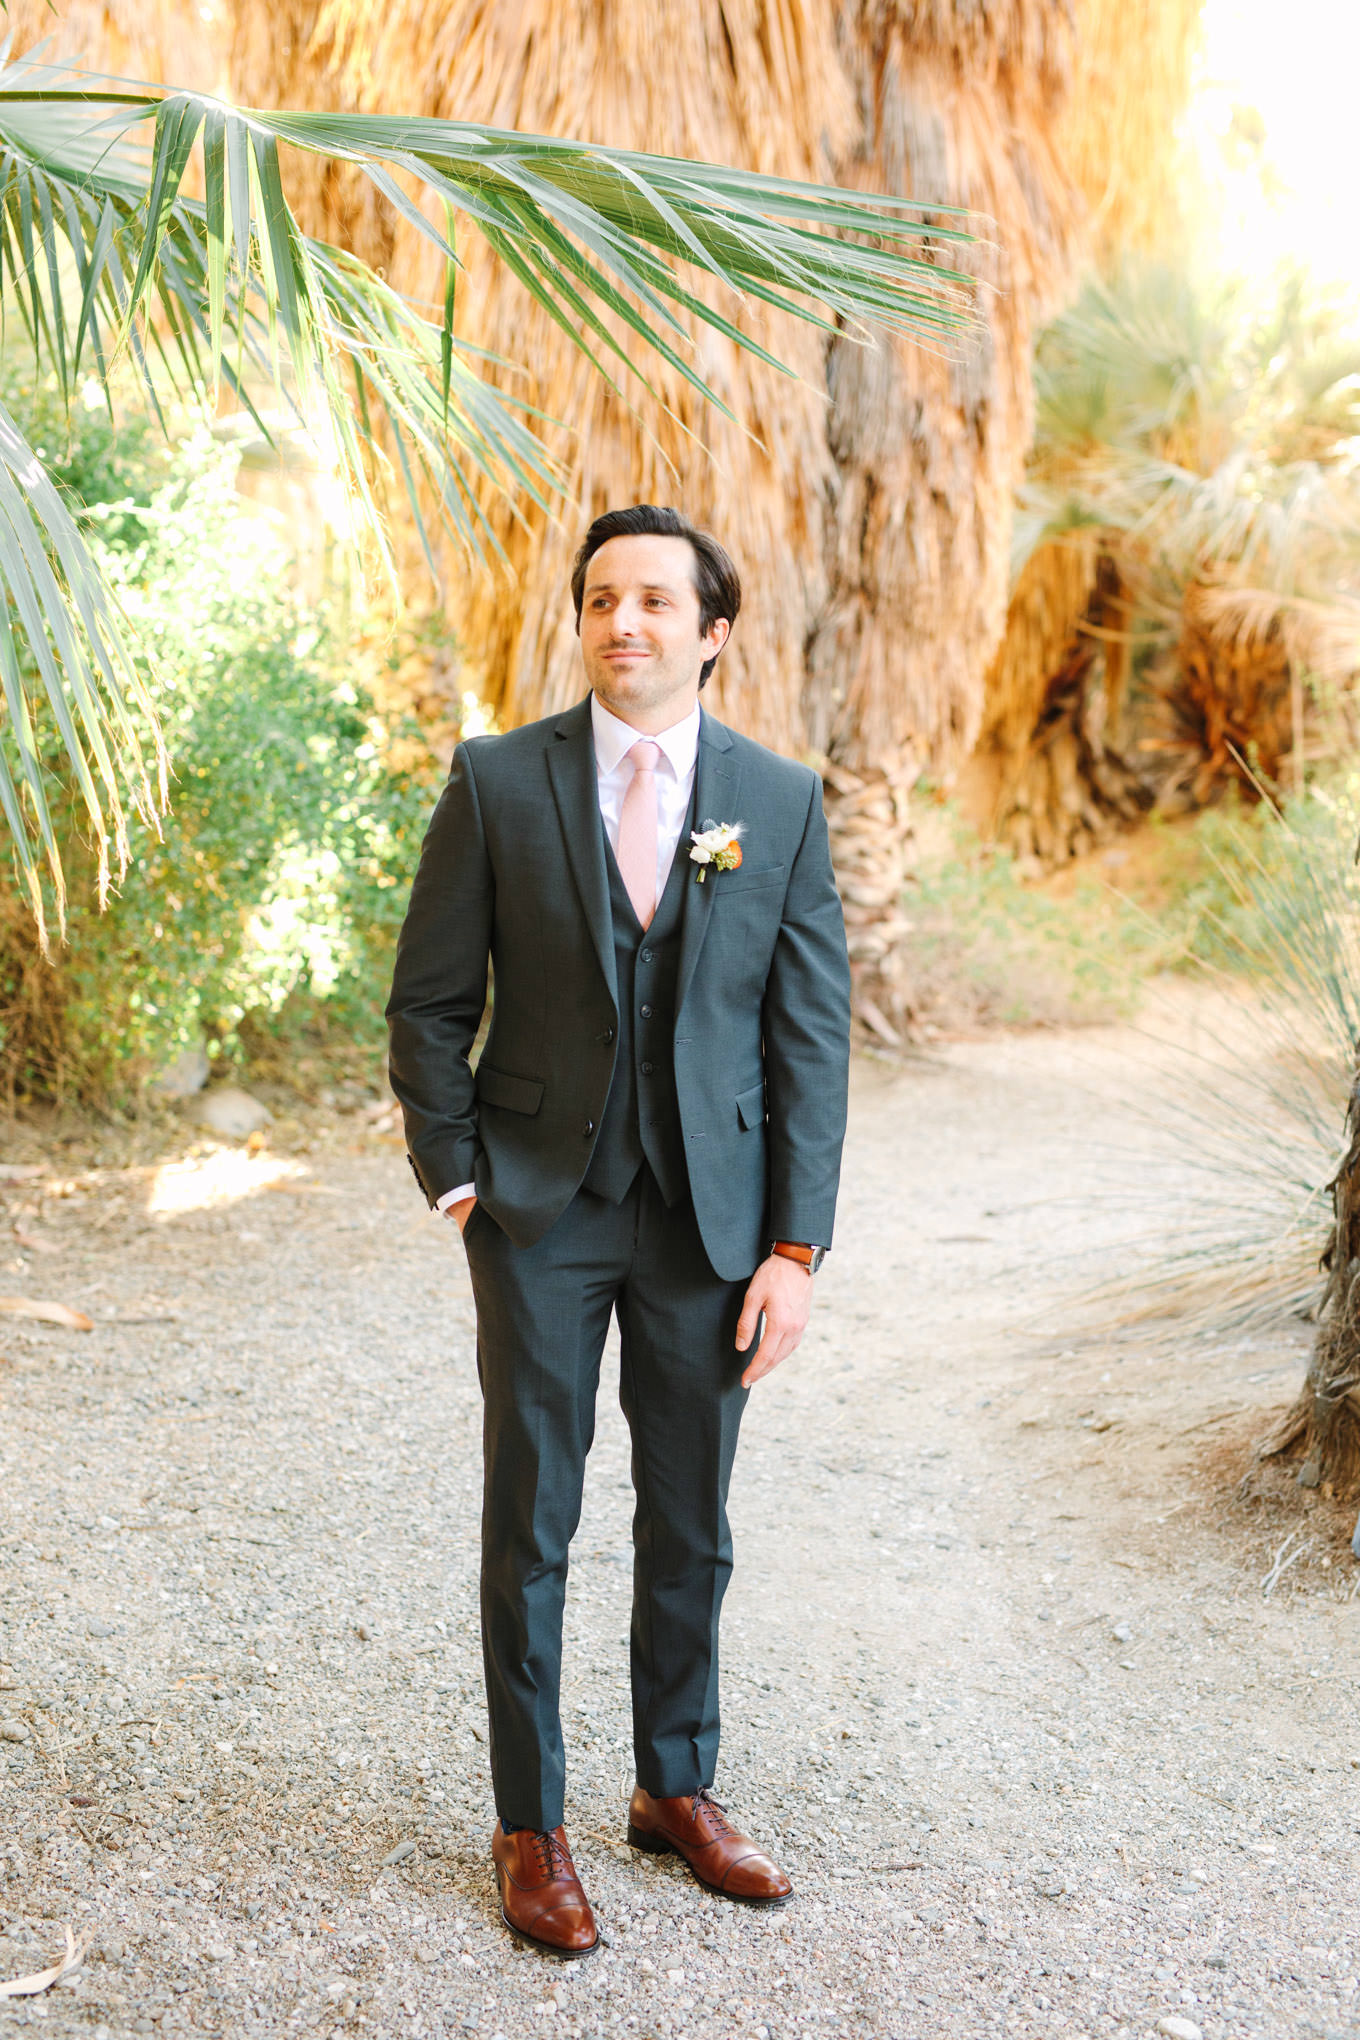 Groom in dark gray suit with blush pink tie | Living Desert Zoo & Gardens wedding with unique details | Elevated and colorful wedding photography for fun-loving couples in Southern California |  #PalmSprings #palmspringsphotographer #gardenwedding #palmspringswedding  Source: Mary Costa Photography | Los Angeles wedding photographer 